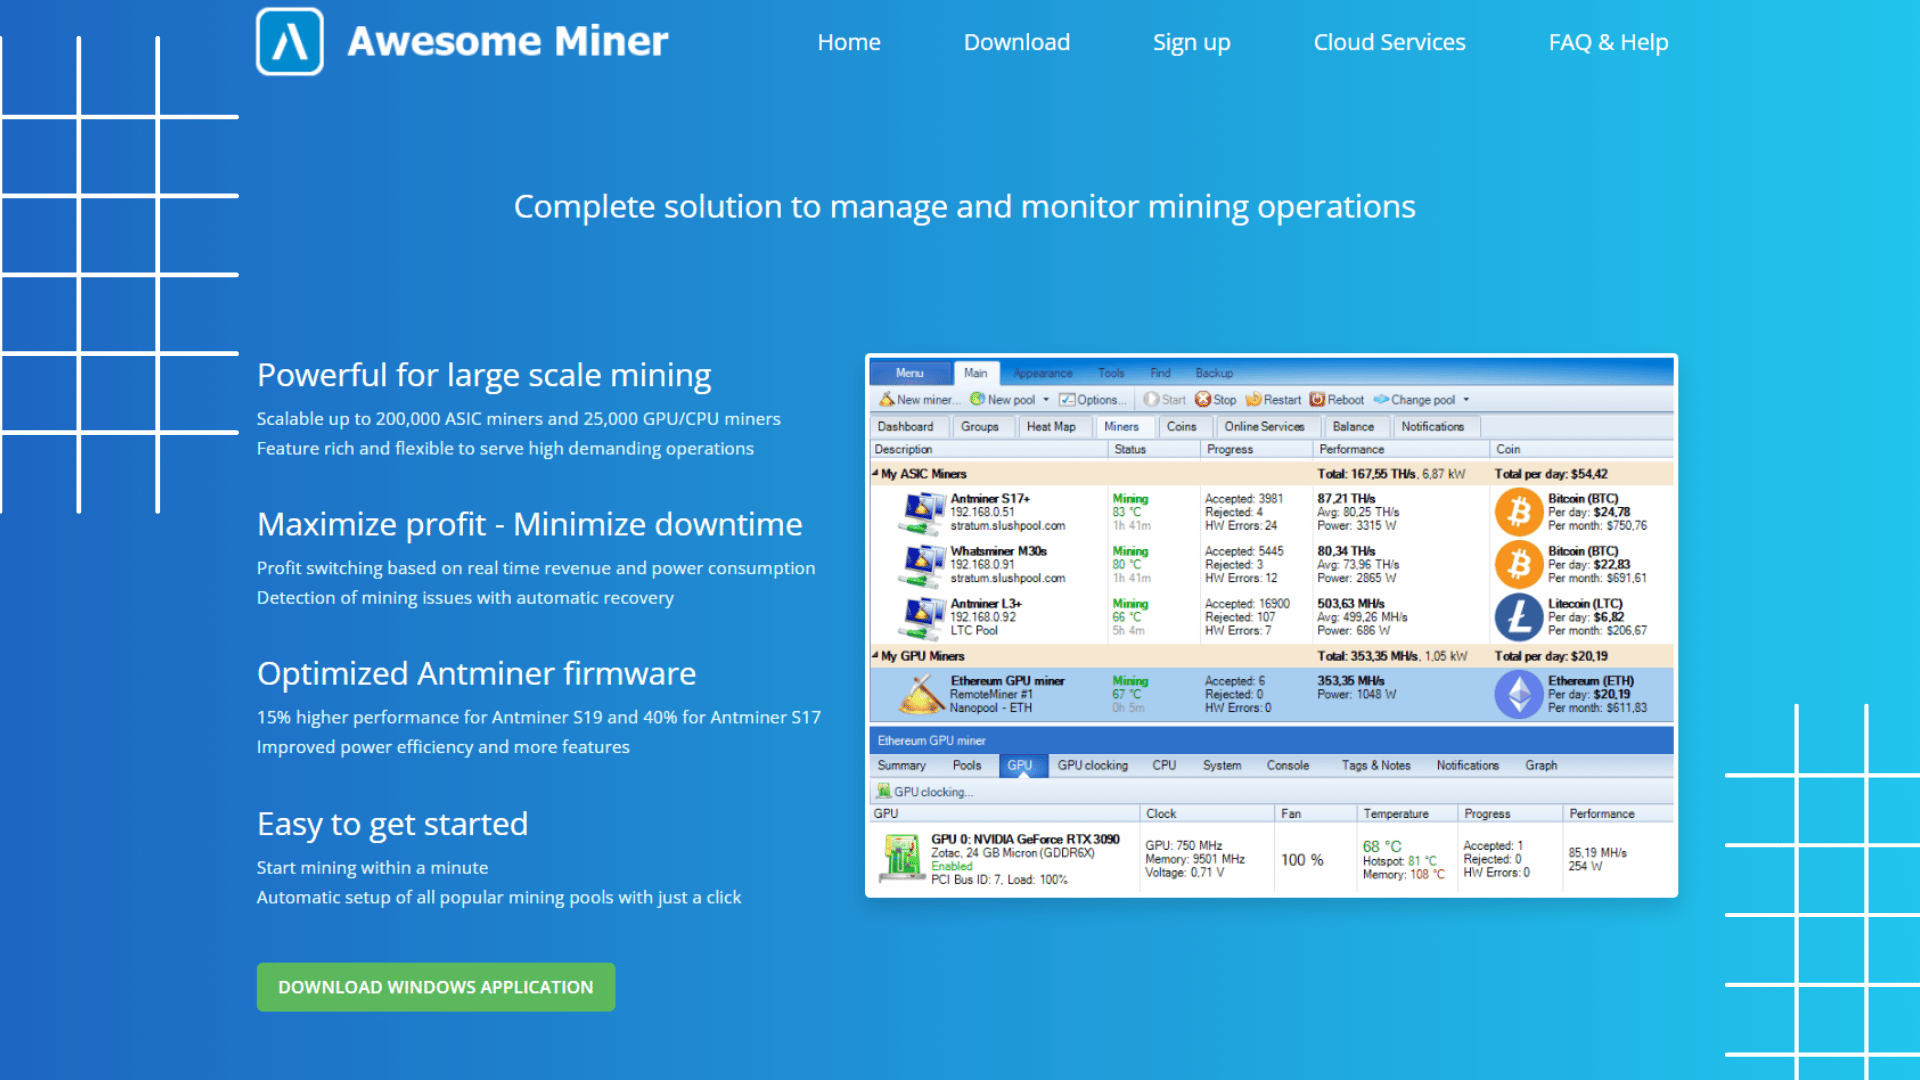 Awesome Miner Features